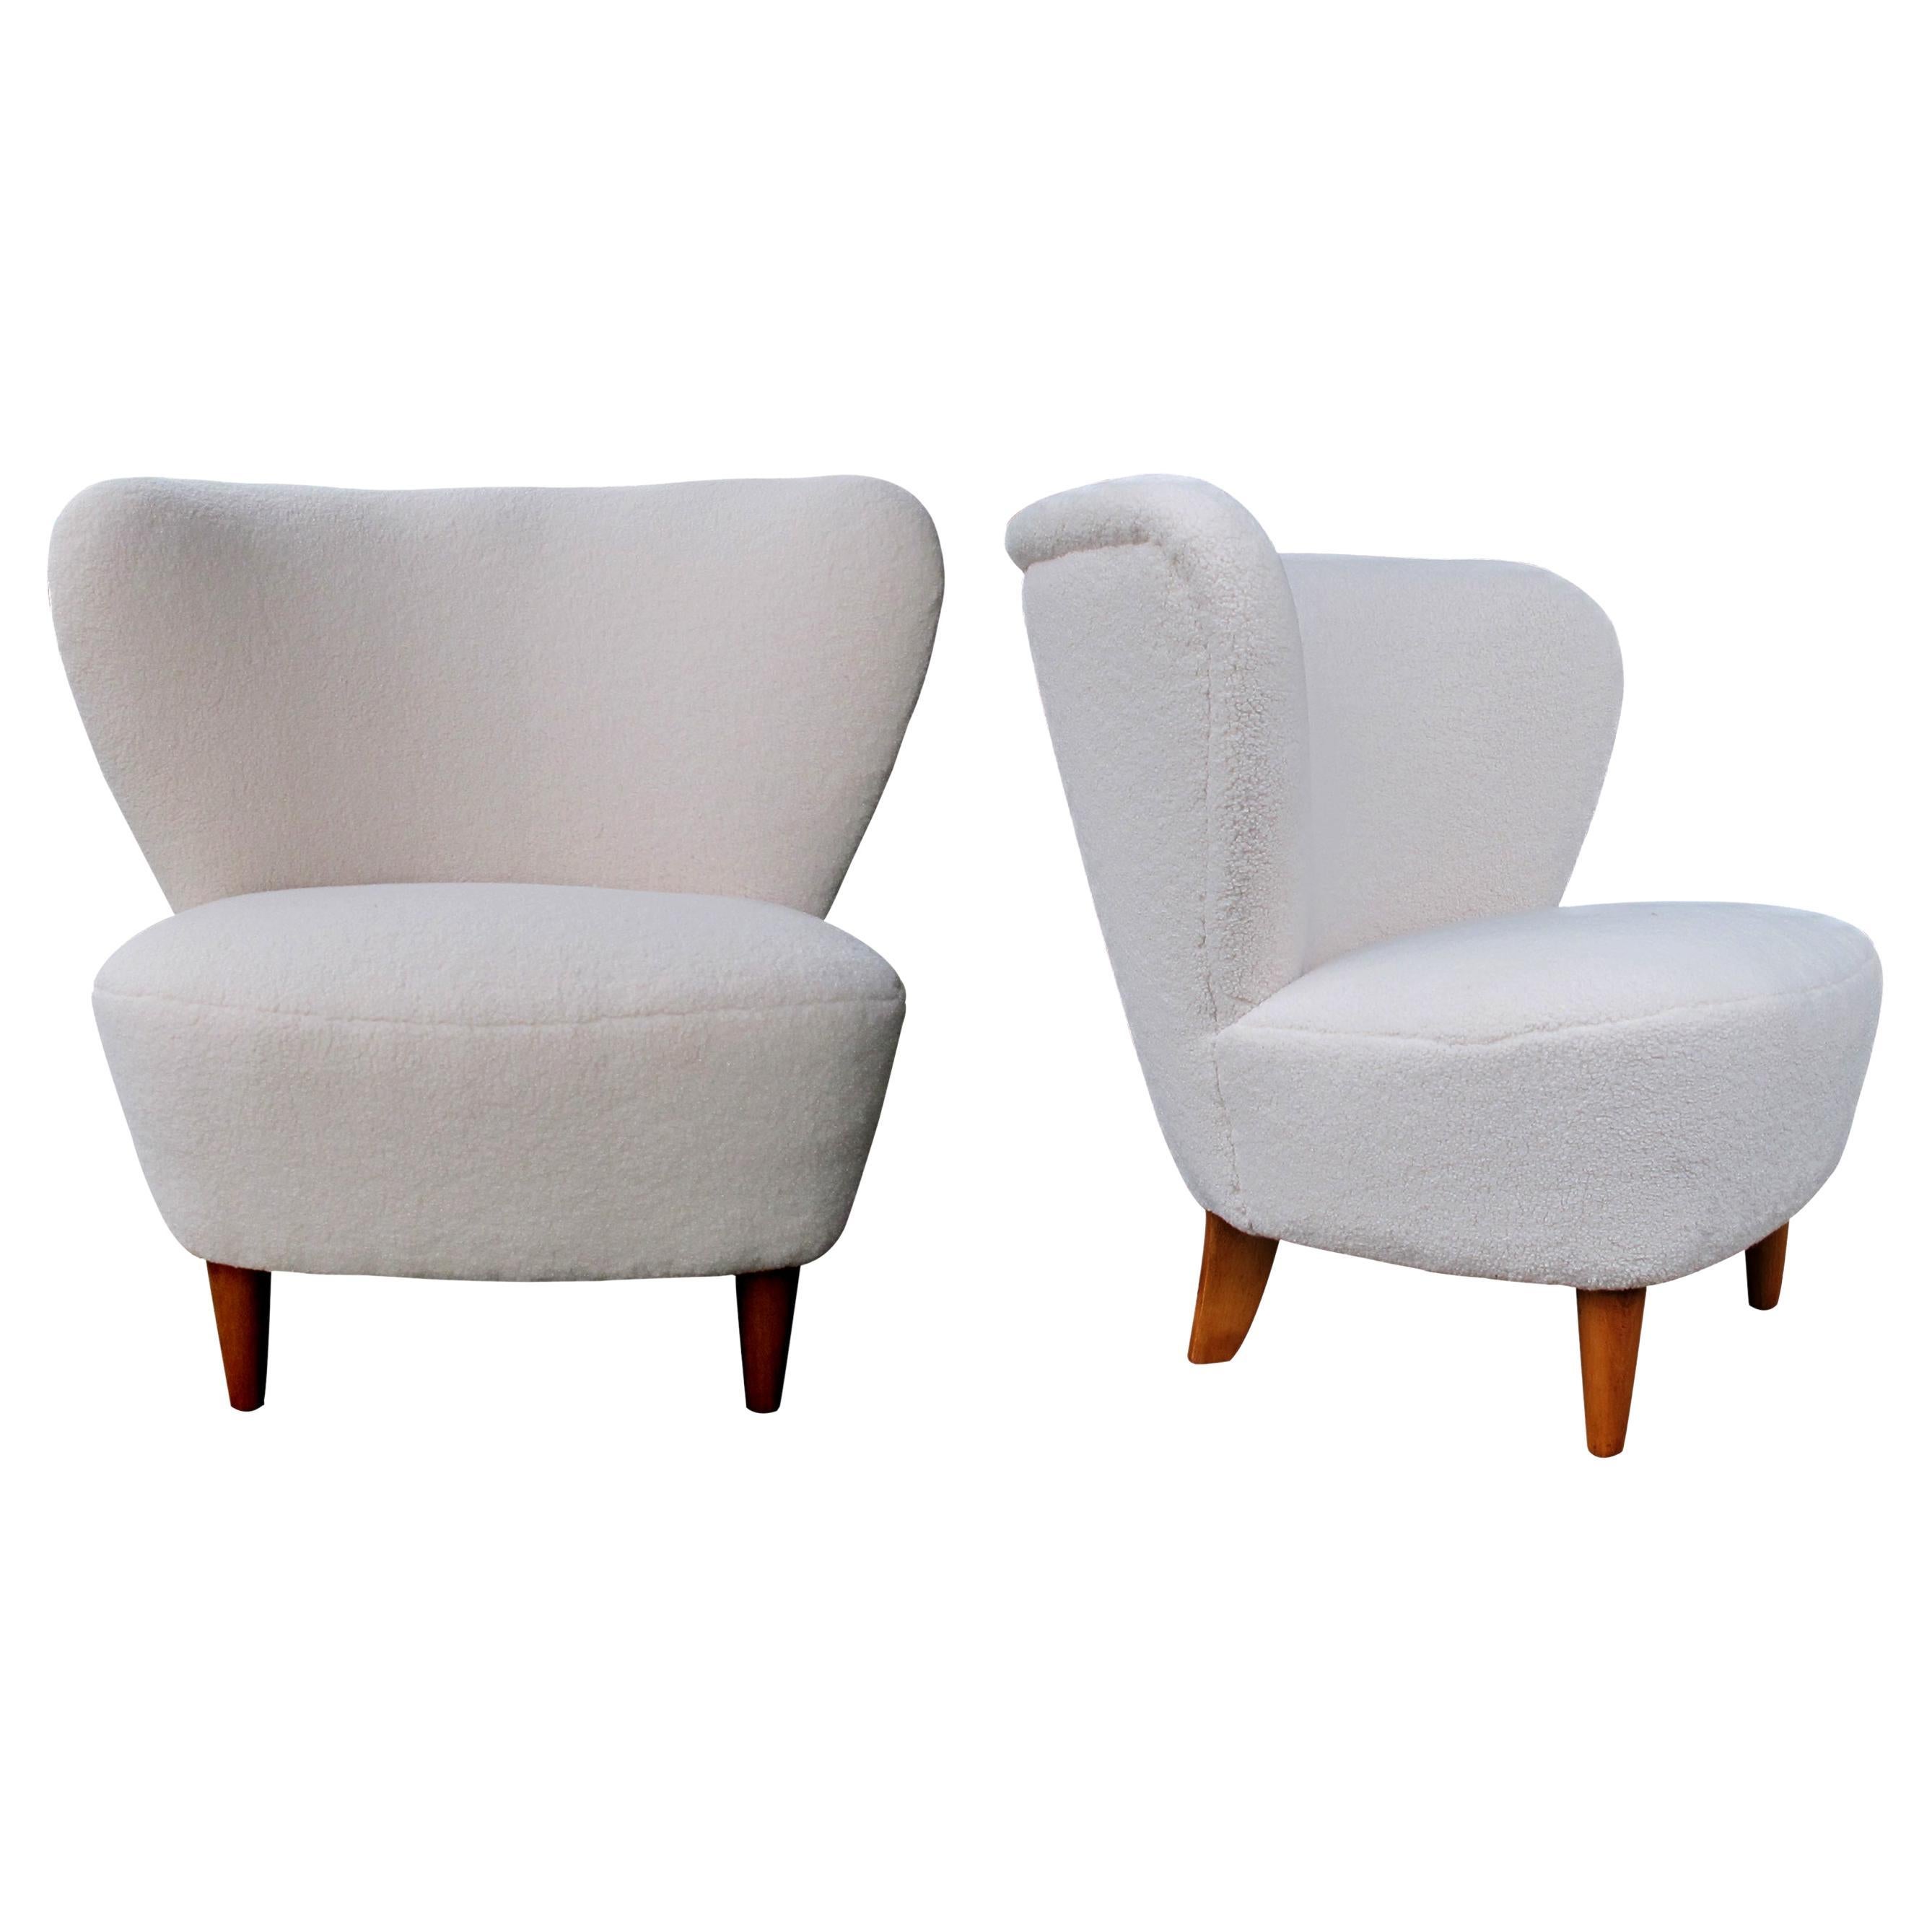 1940s Pair of Cocktail Armchairs by Gösta Jonsson Newly Upholstered, Swedish For Sale